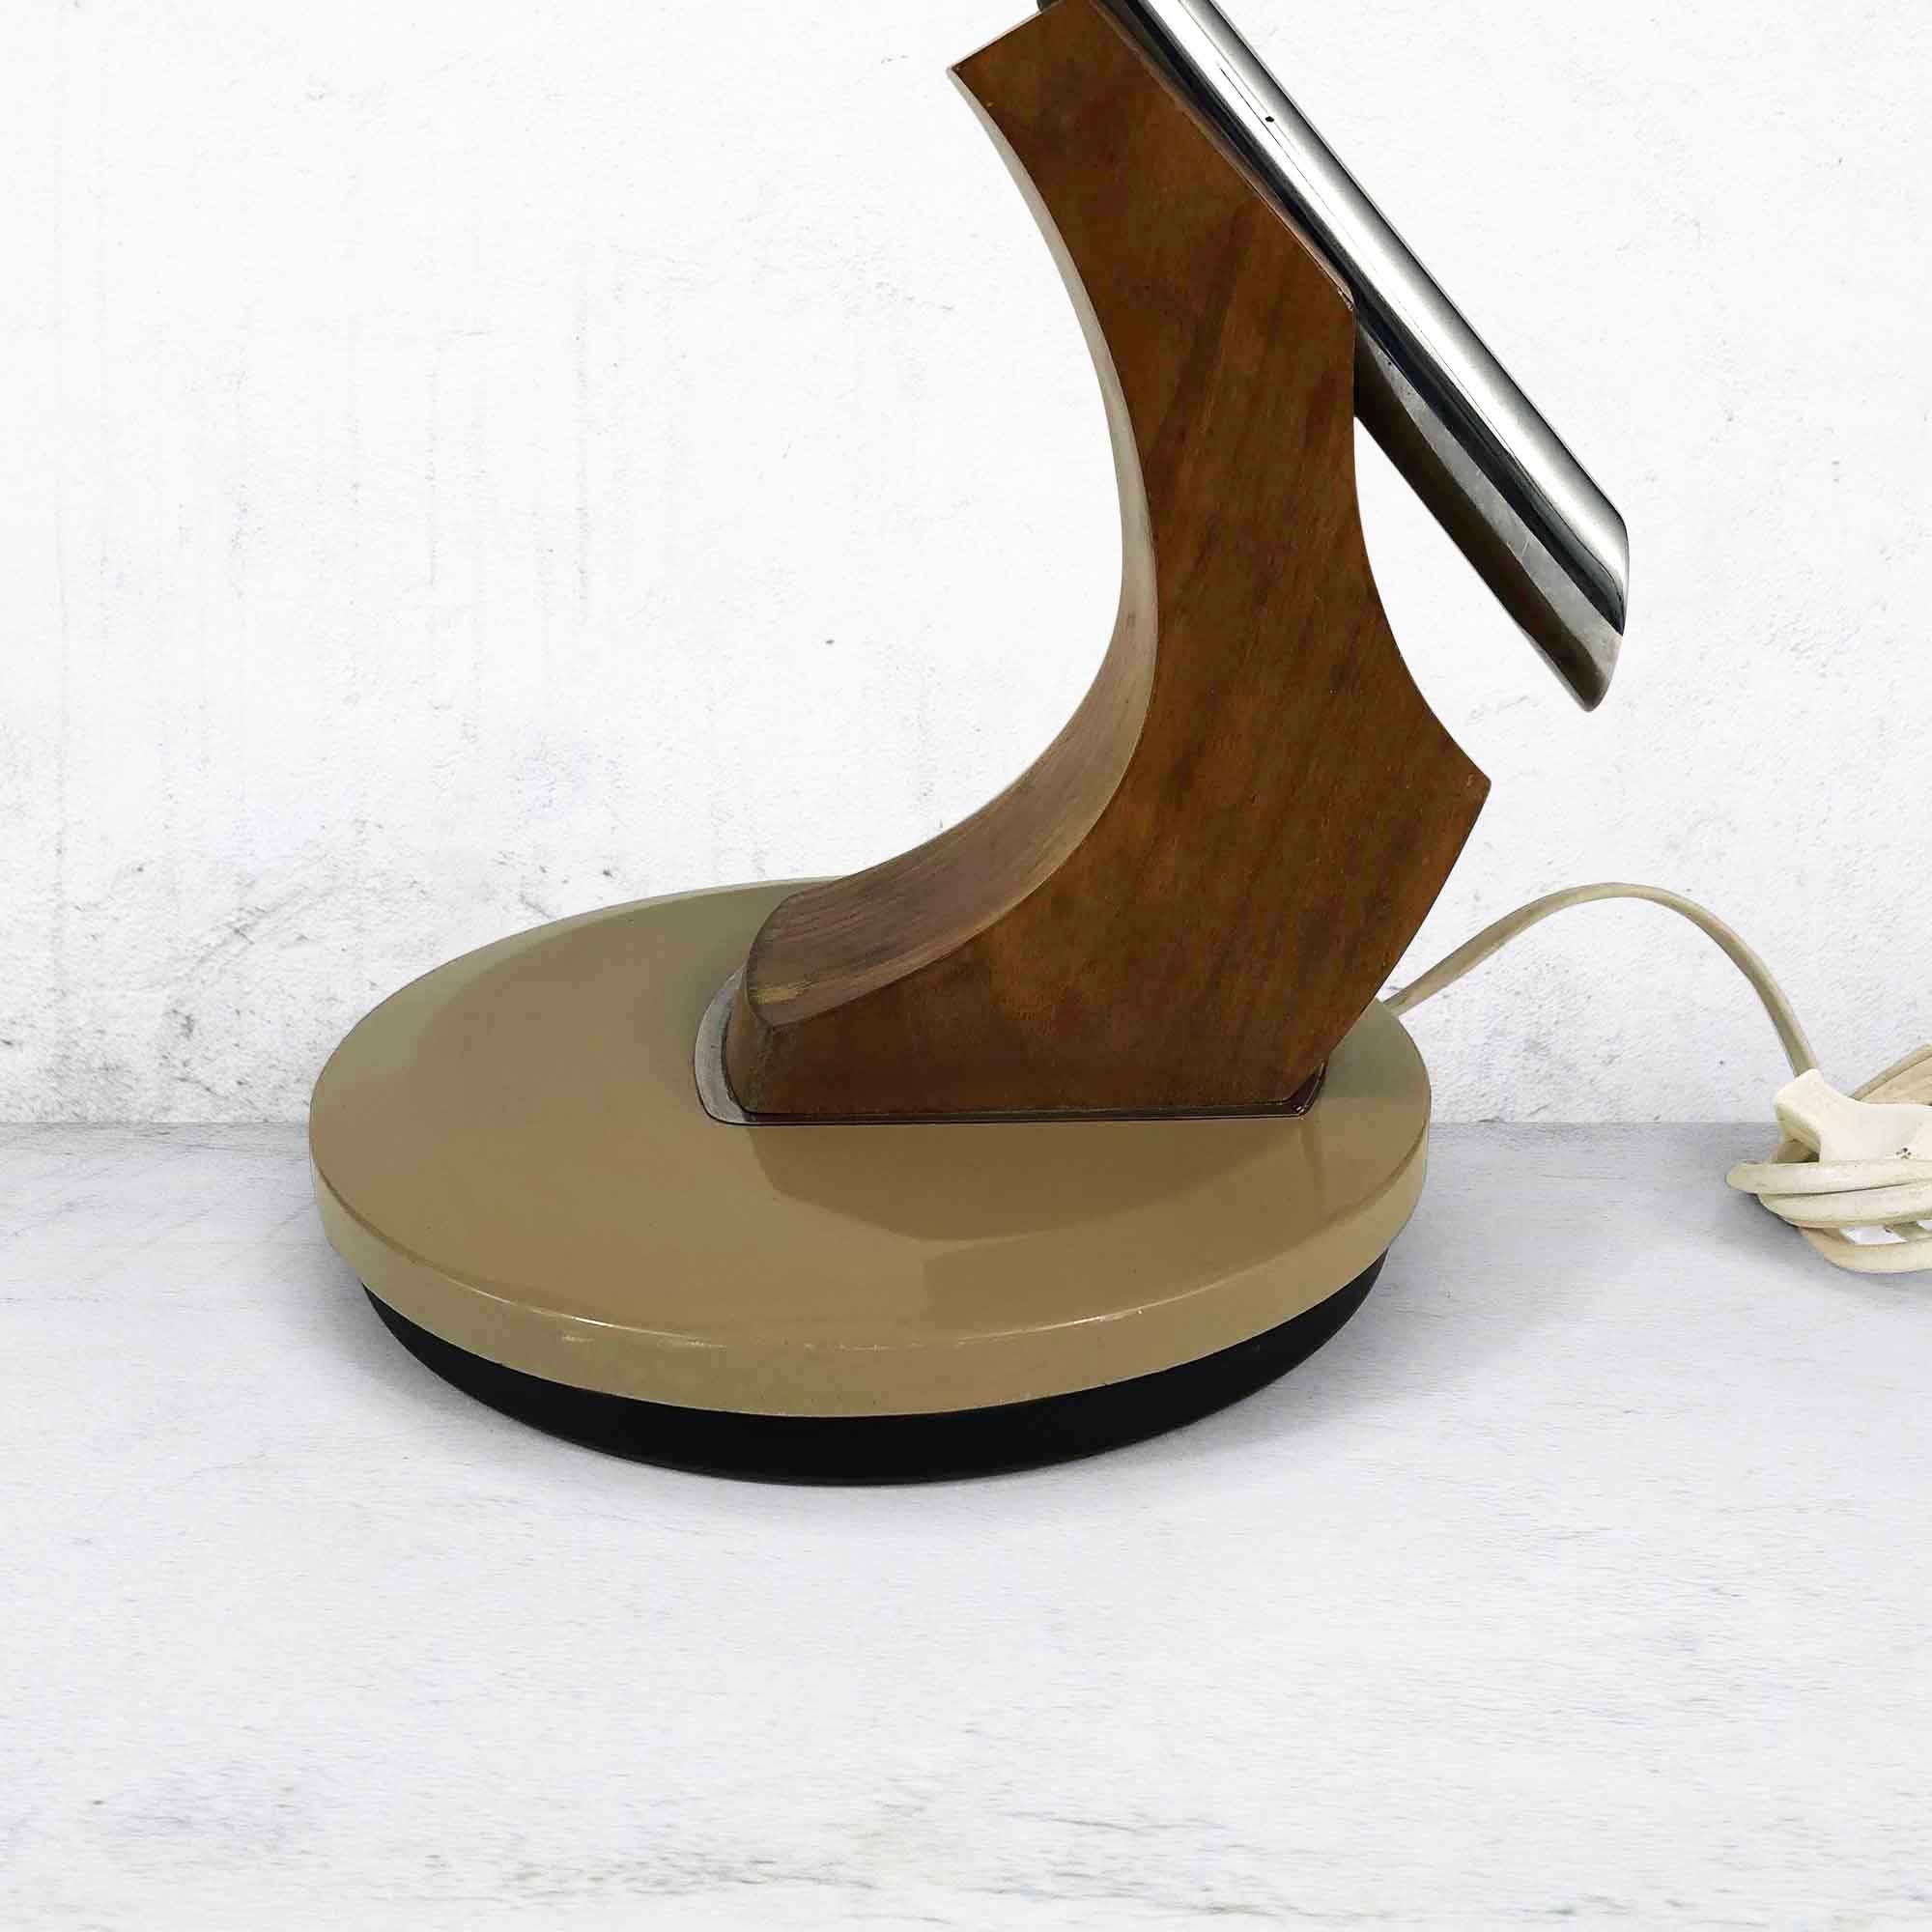 Elegant Fase 530 Rifle desk lamp in the color beige. The base and shade are made from metal and can both rotate. The arm is made of wood and chrome. The glass shade is not original. These types of lamps can be seen frequently in movies or tv-series.